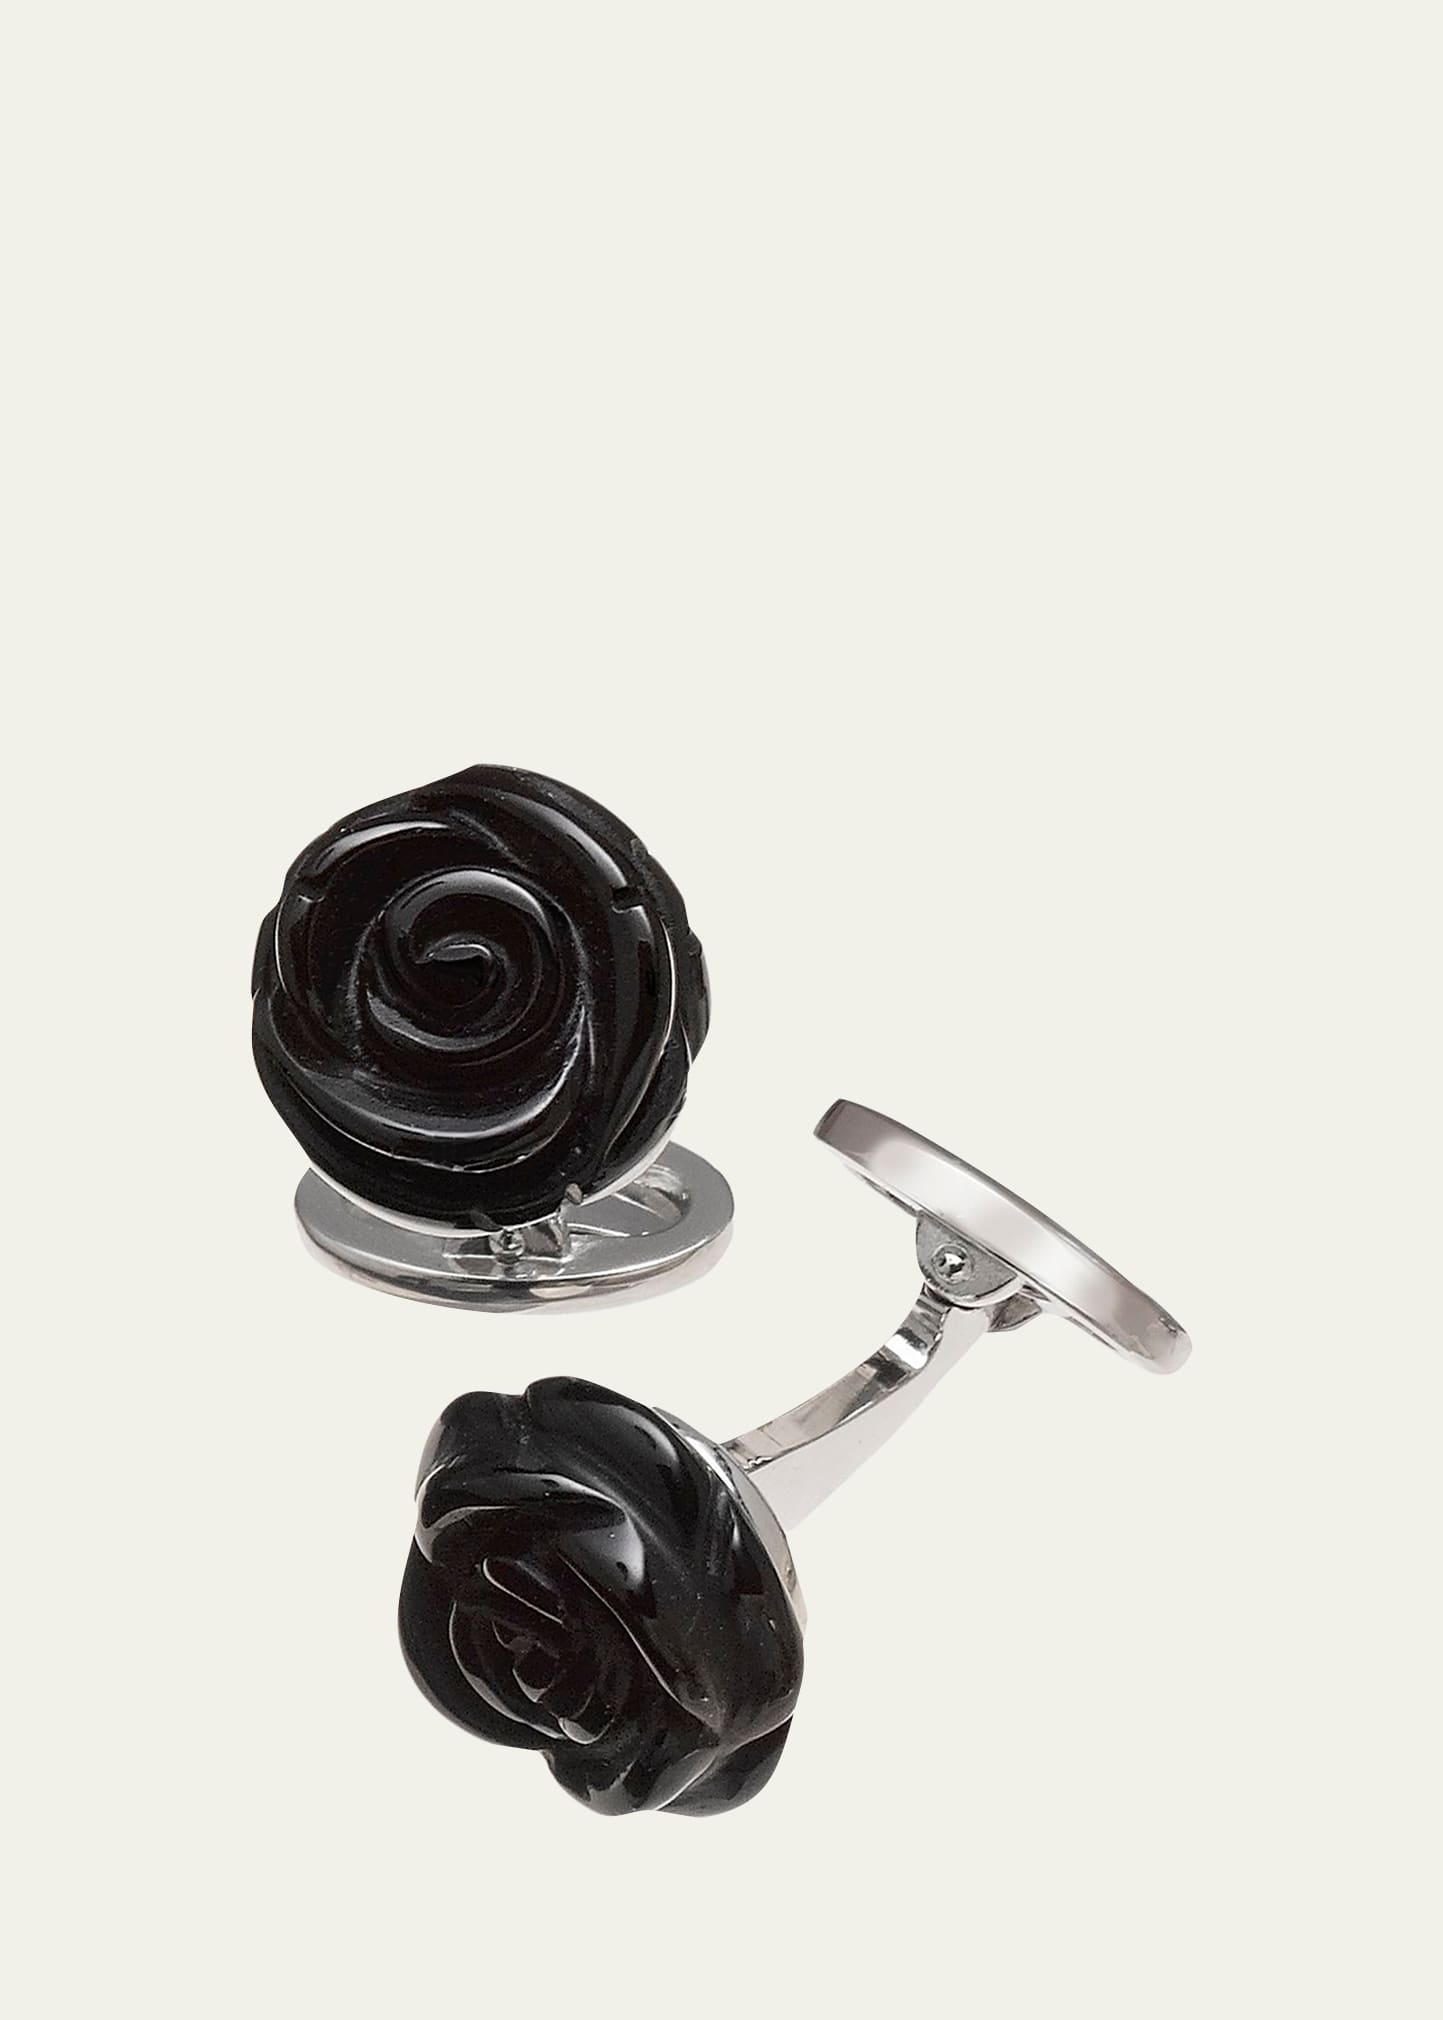 Onyx Carved Rose Cuff Links